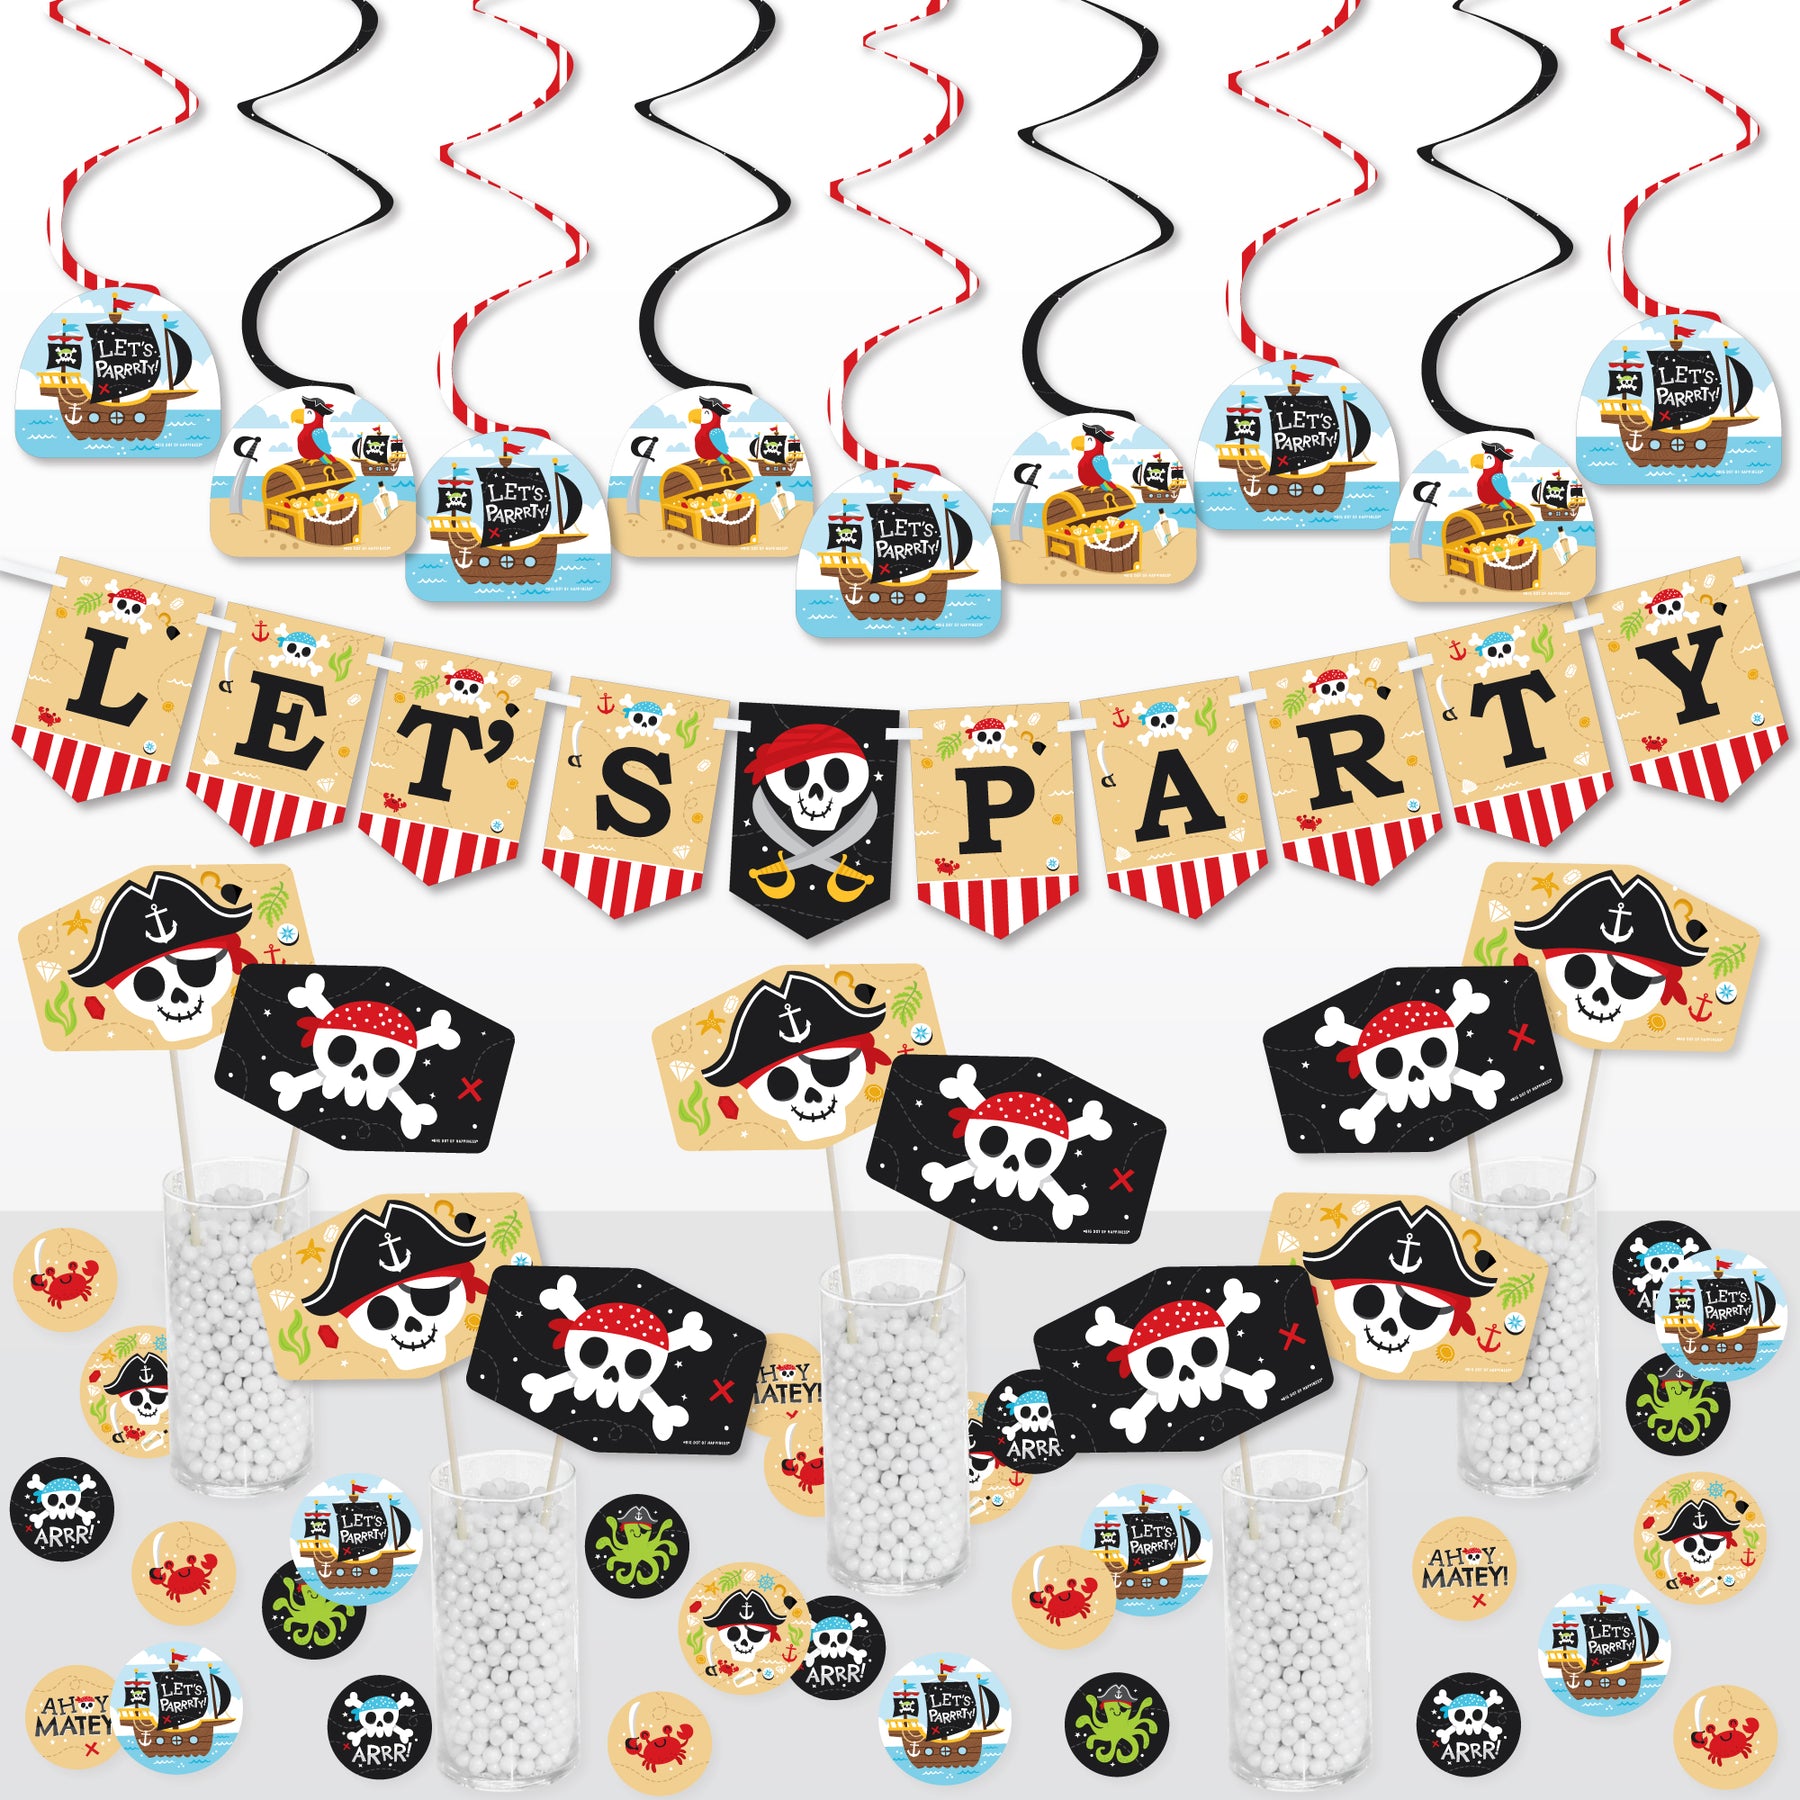 Pirate Ship Adventures - Skull Birthday Party Supplies Decoration